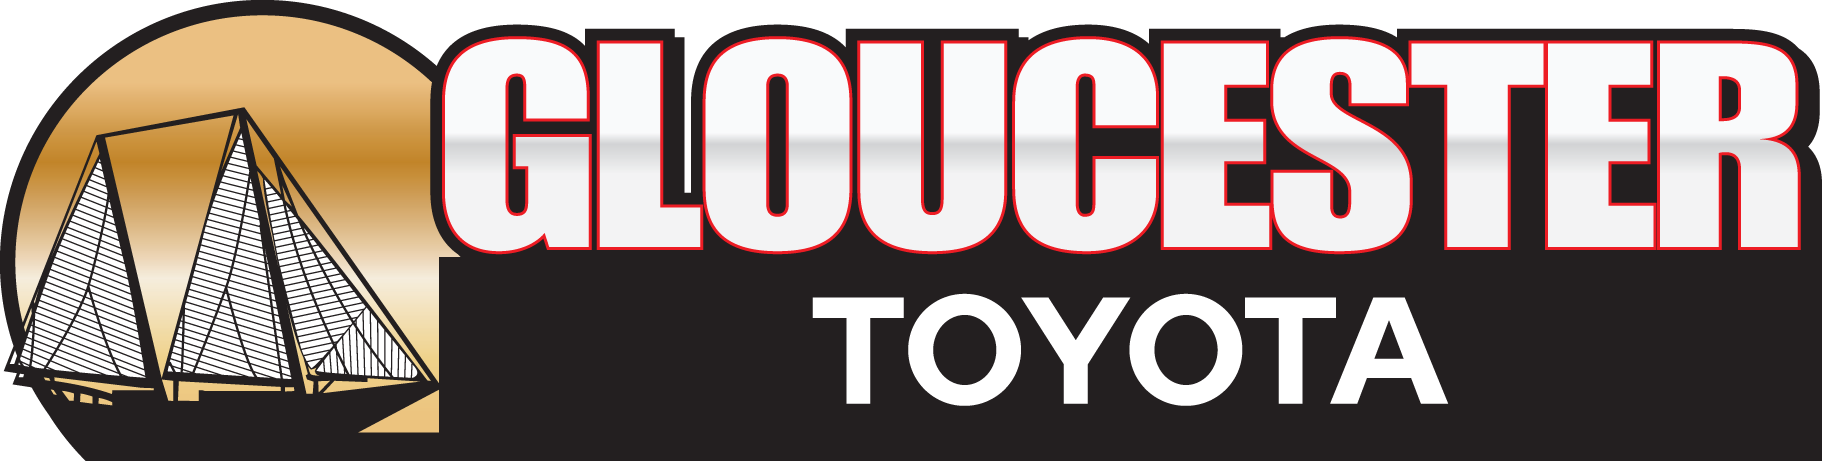 gloucester-toyota.png